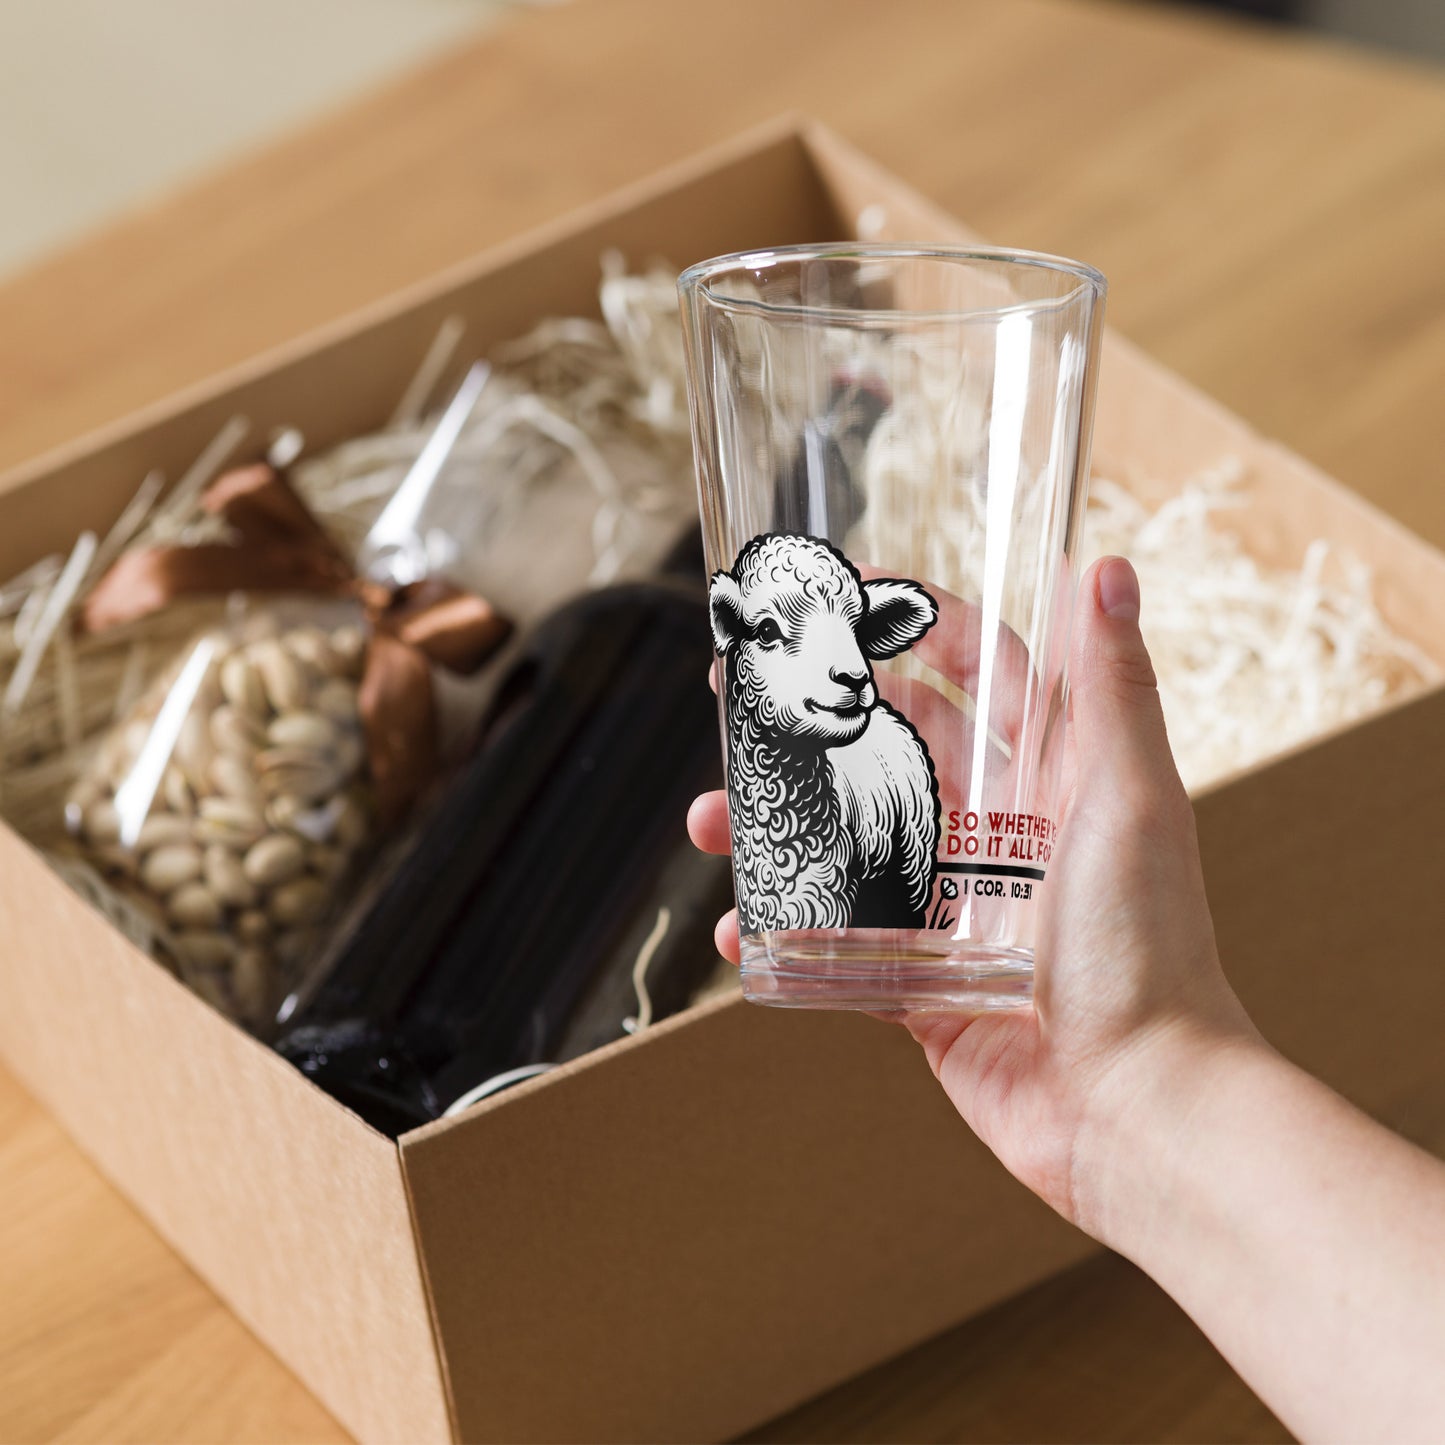 The Lamb Shaker Pint Glass by Raul Anthony Monge